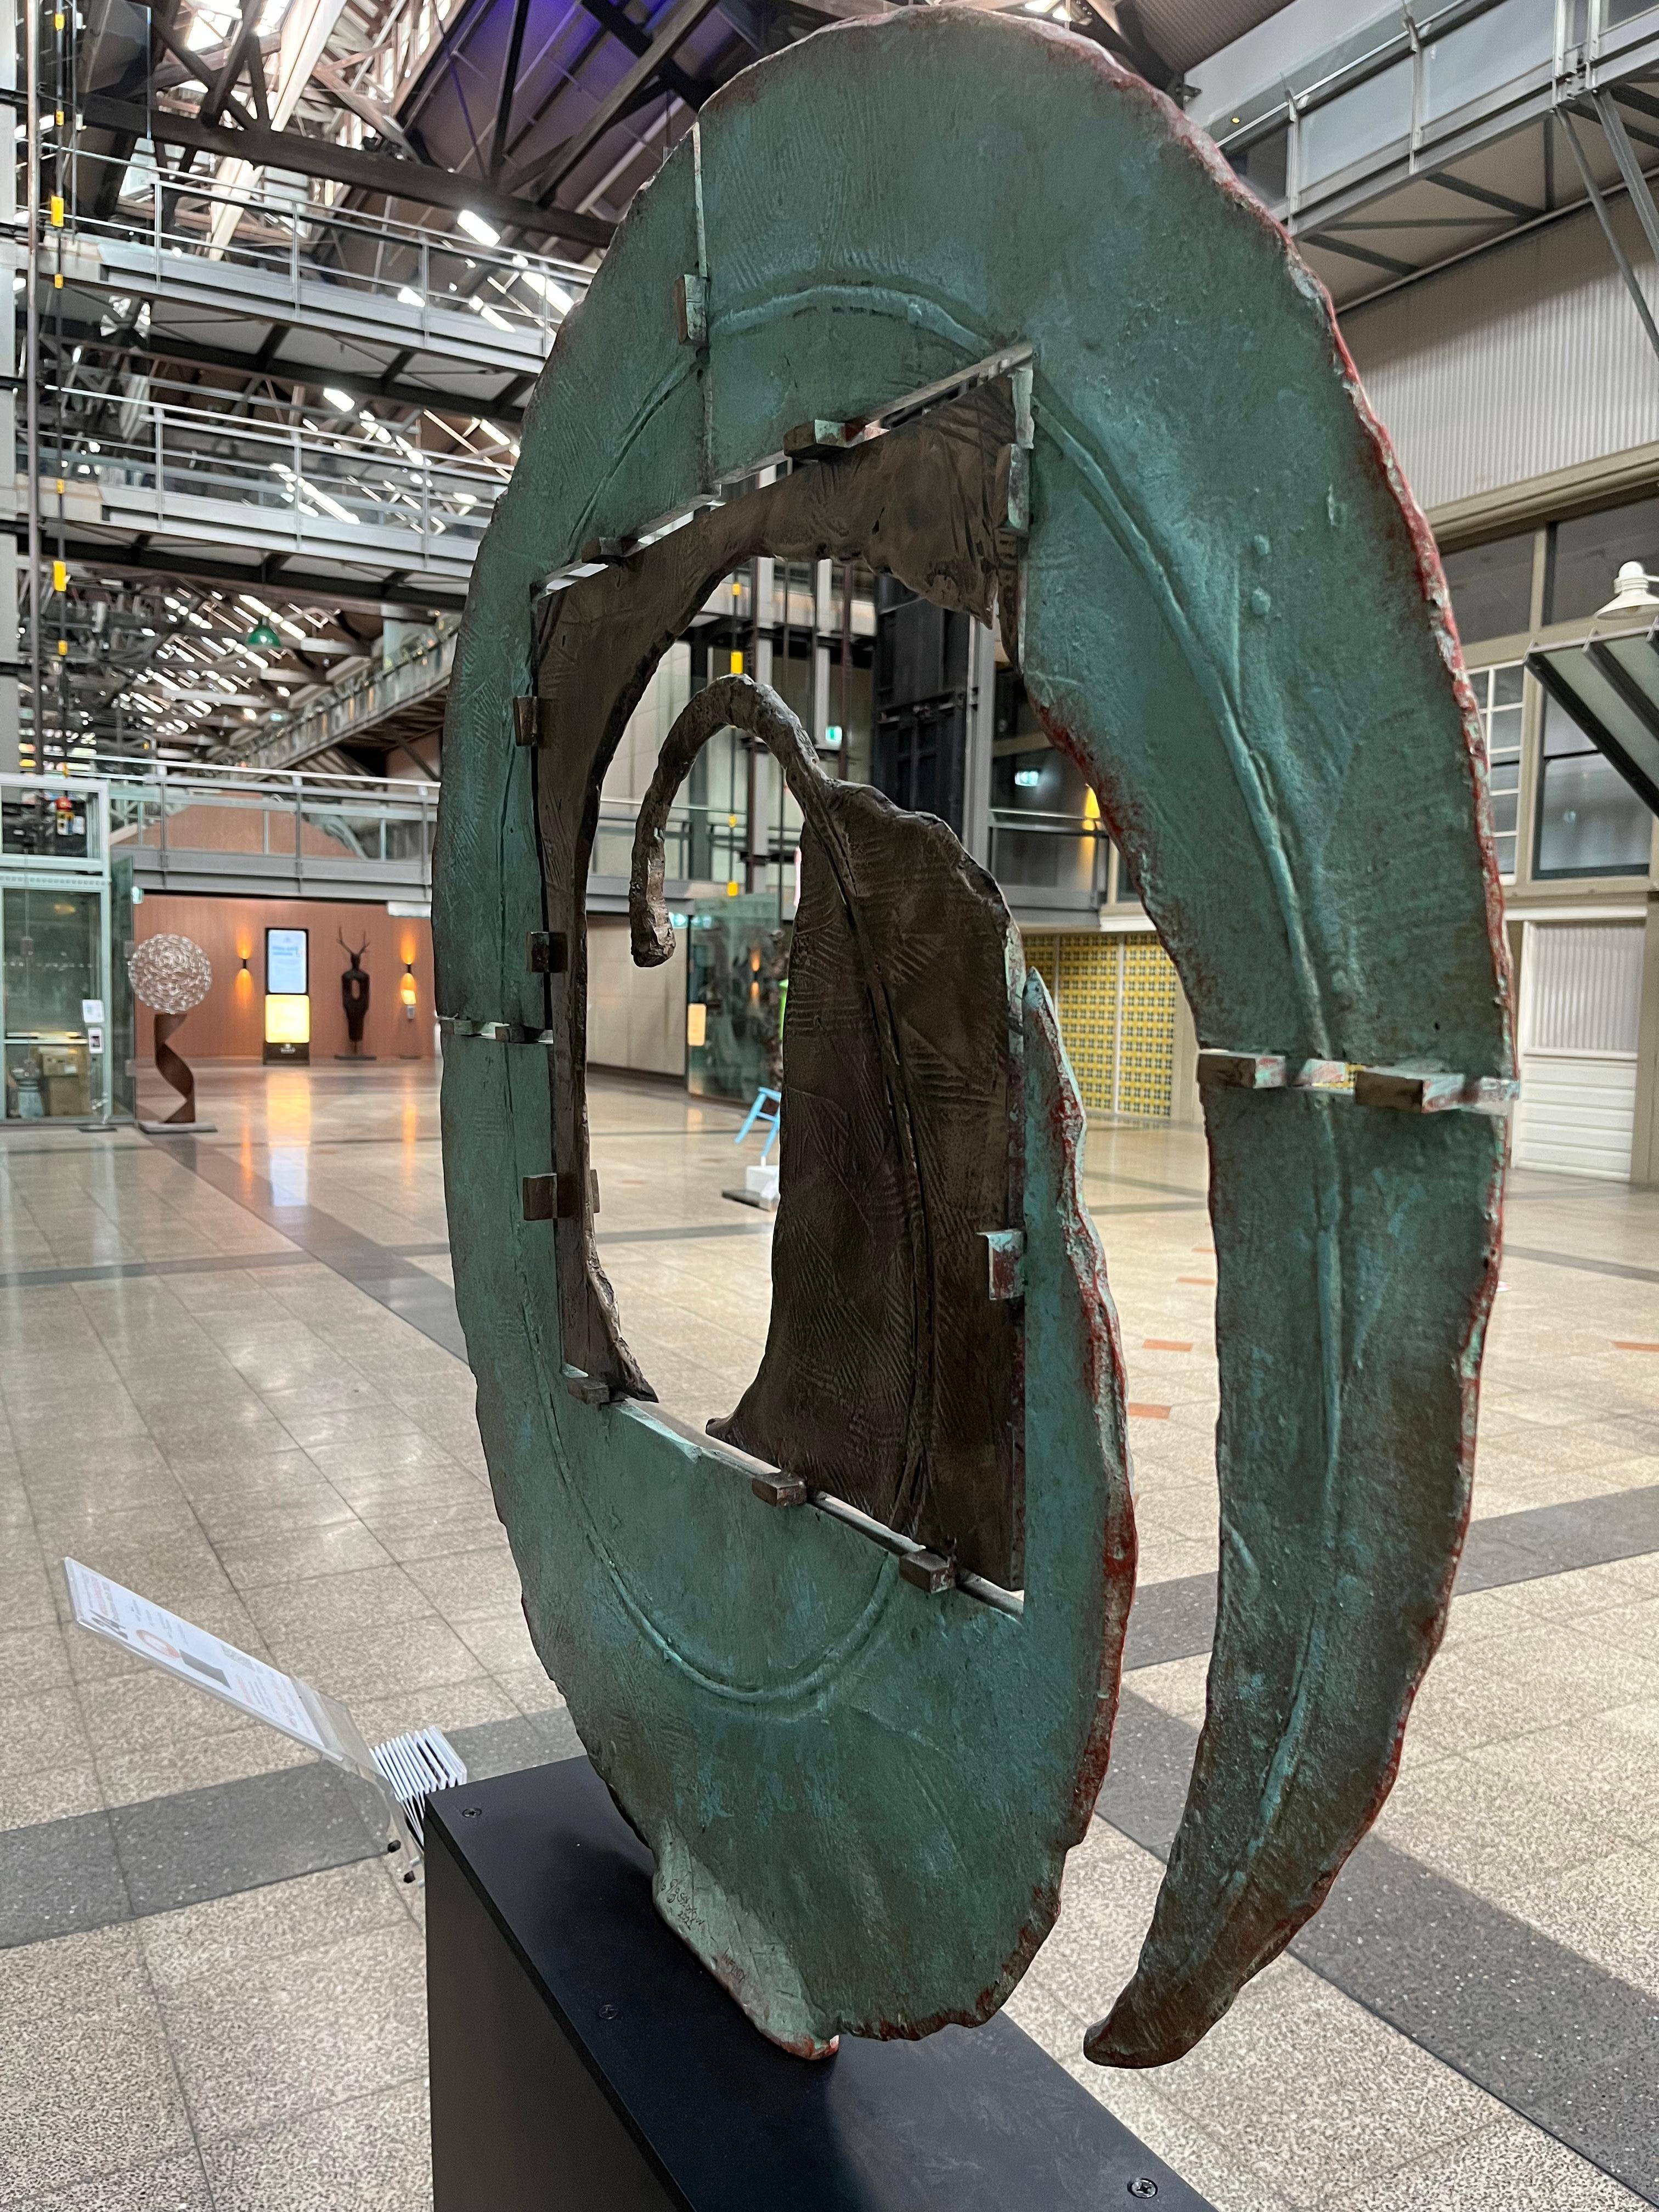 Statement by artist Stephen Glassborow on his sculpture Infinity Leaf:

With commissions, ideas develop in areas that I may not normally consider. These ideas can provide a wealth of inspiration, Infinity was one such idea. I wanted to create a